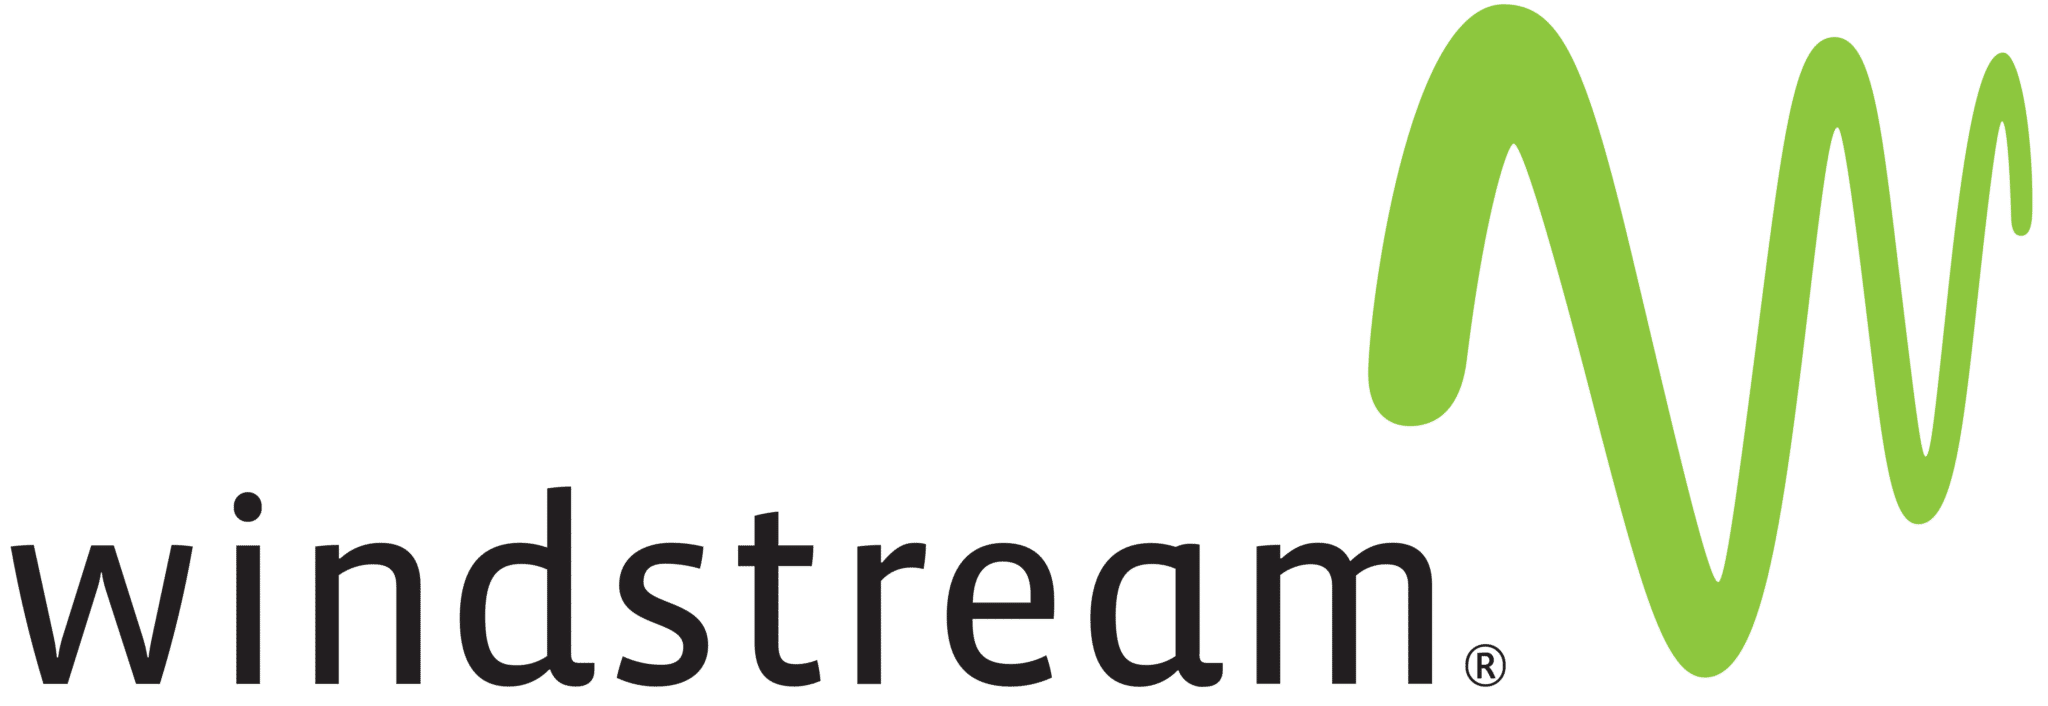 The Windstream logo: "windstream" in black, lowercase letters and a green squiggle.